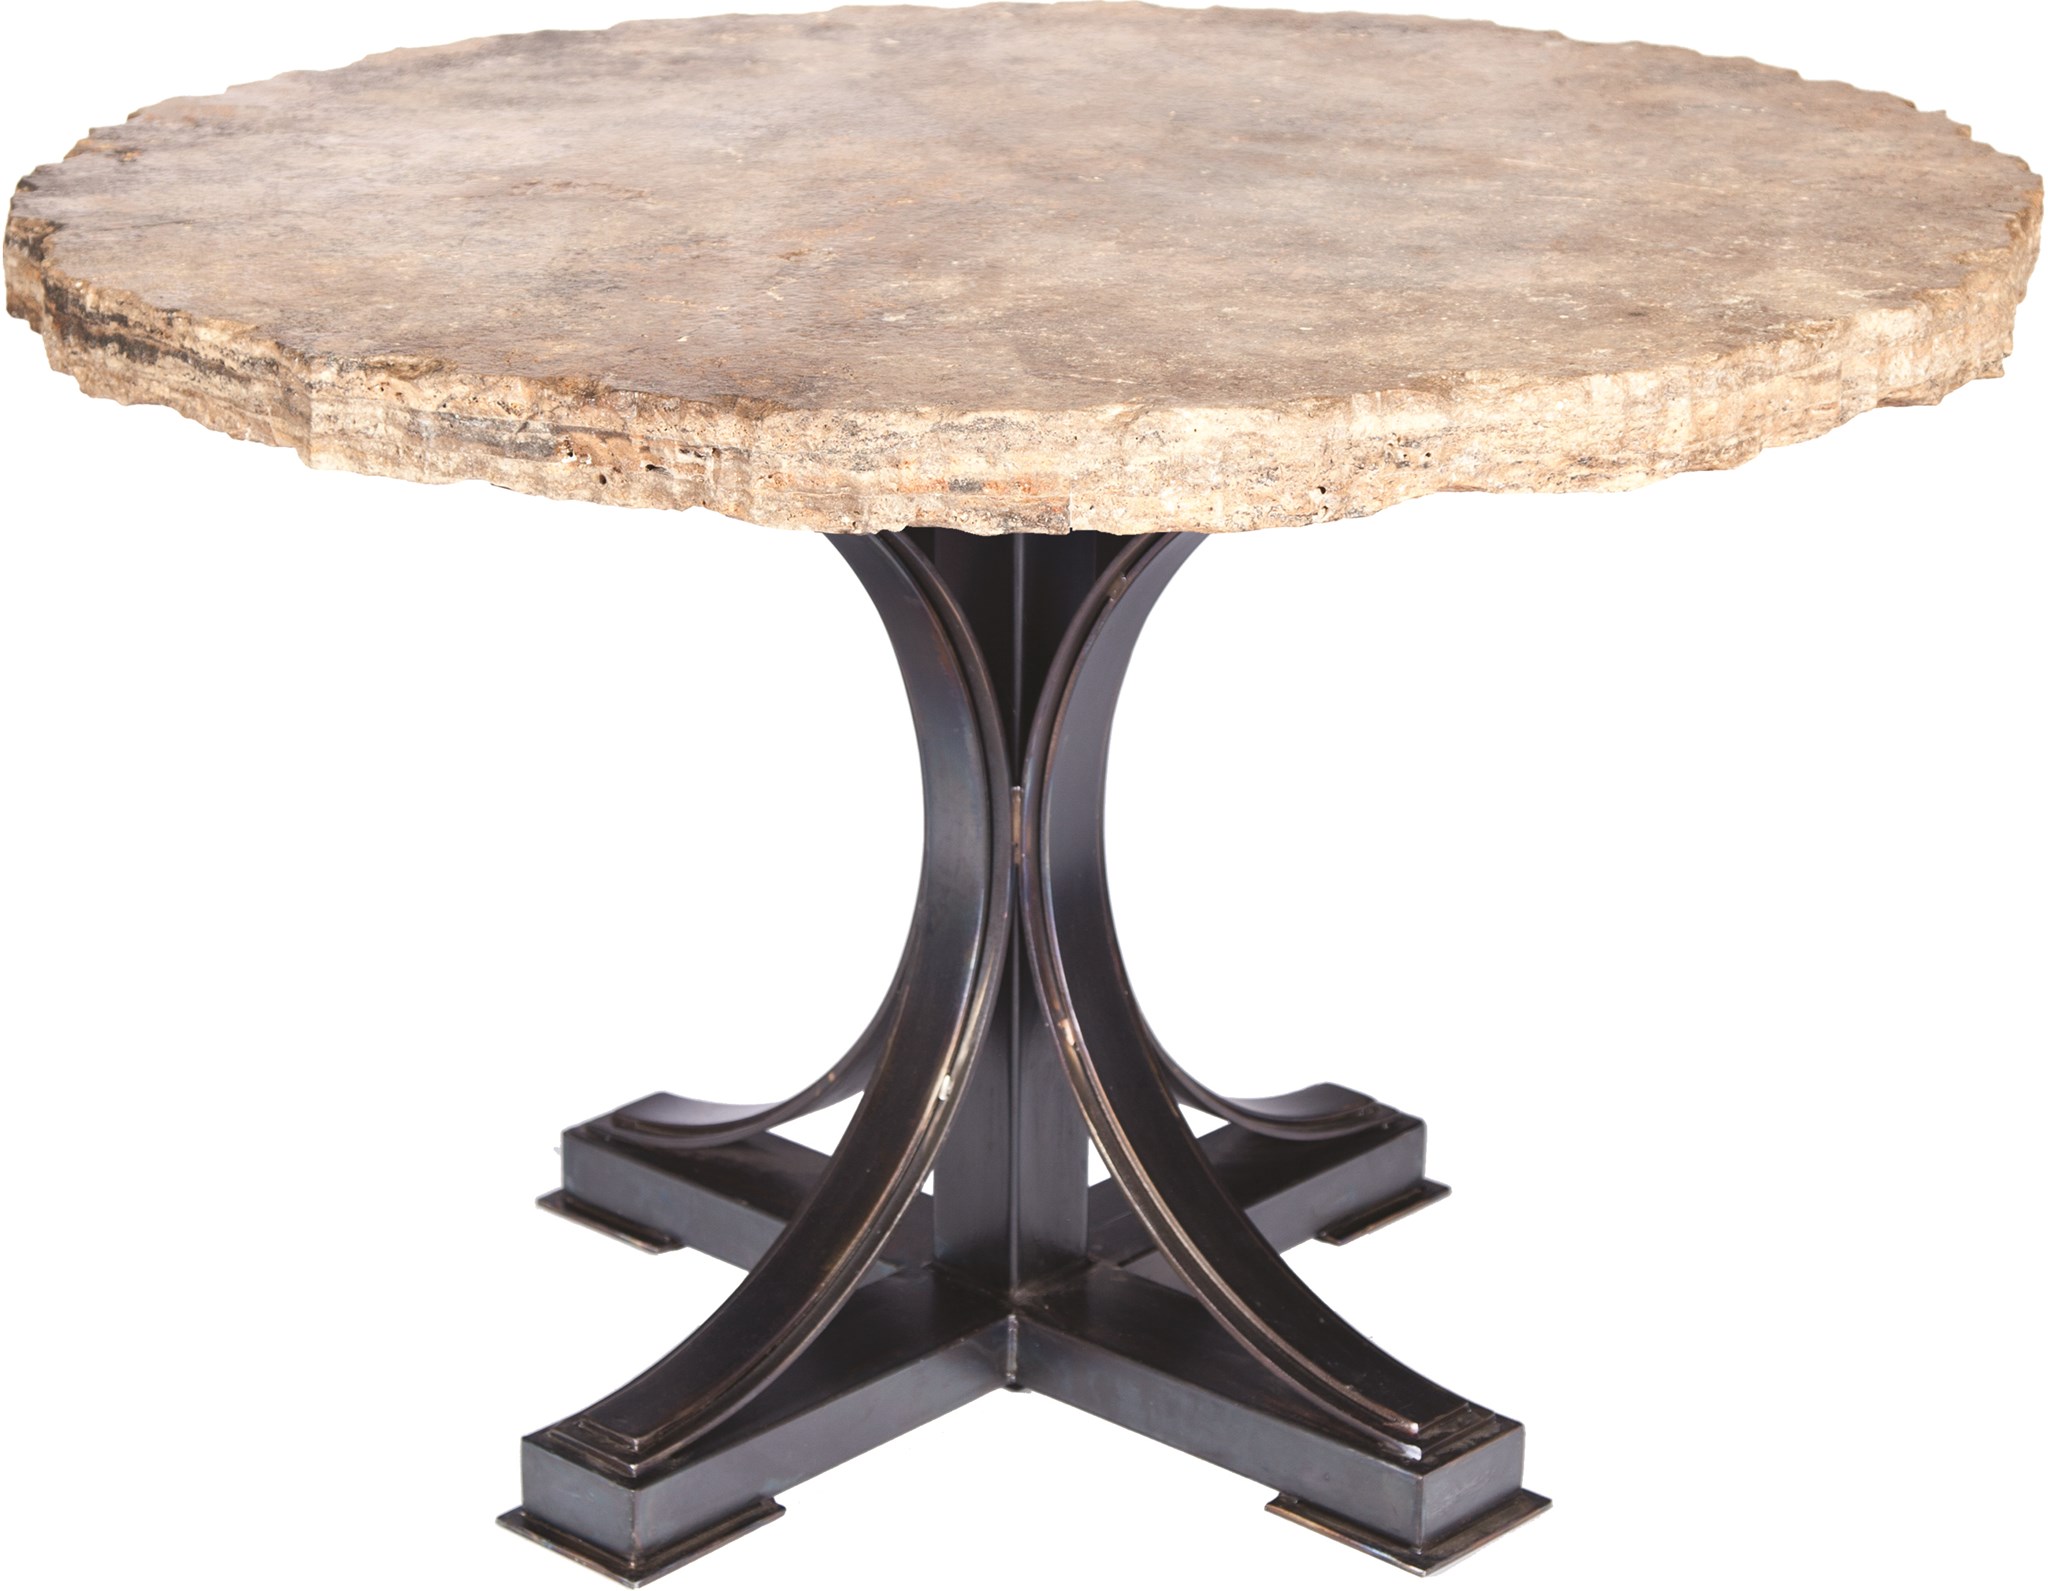 stone table top round kitchen table